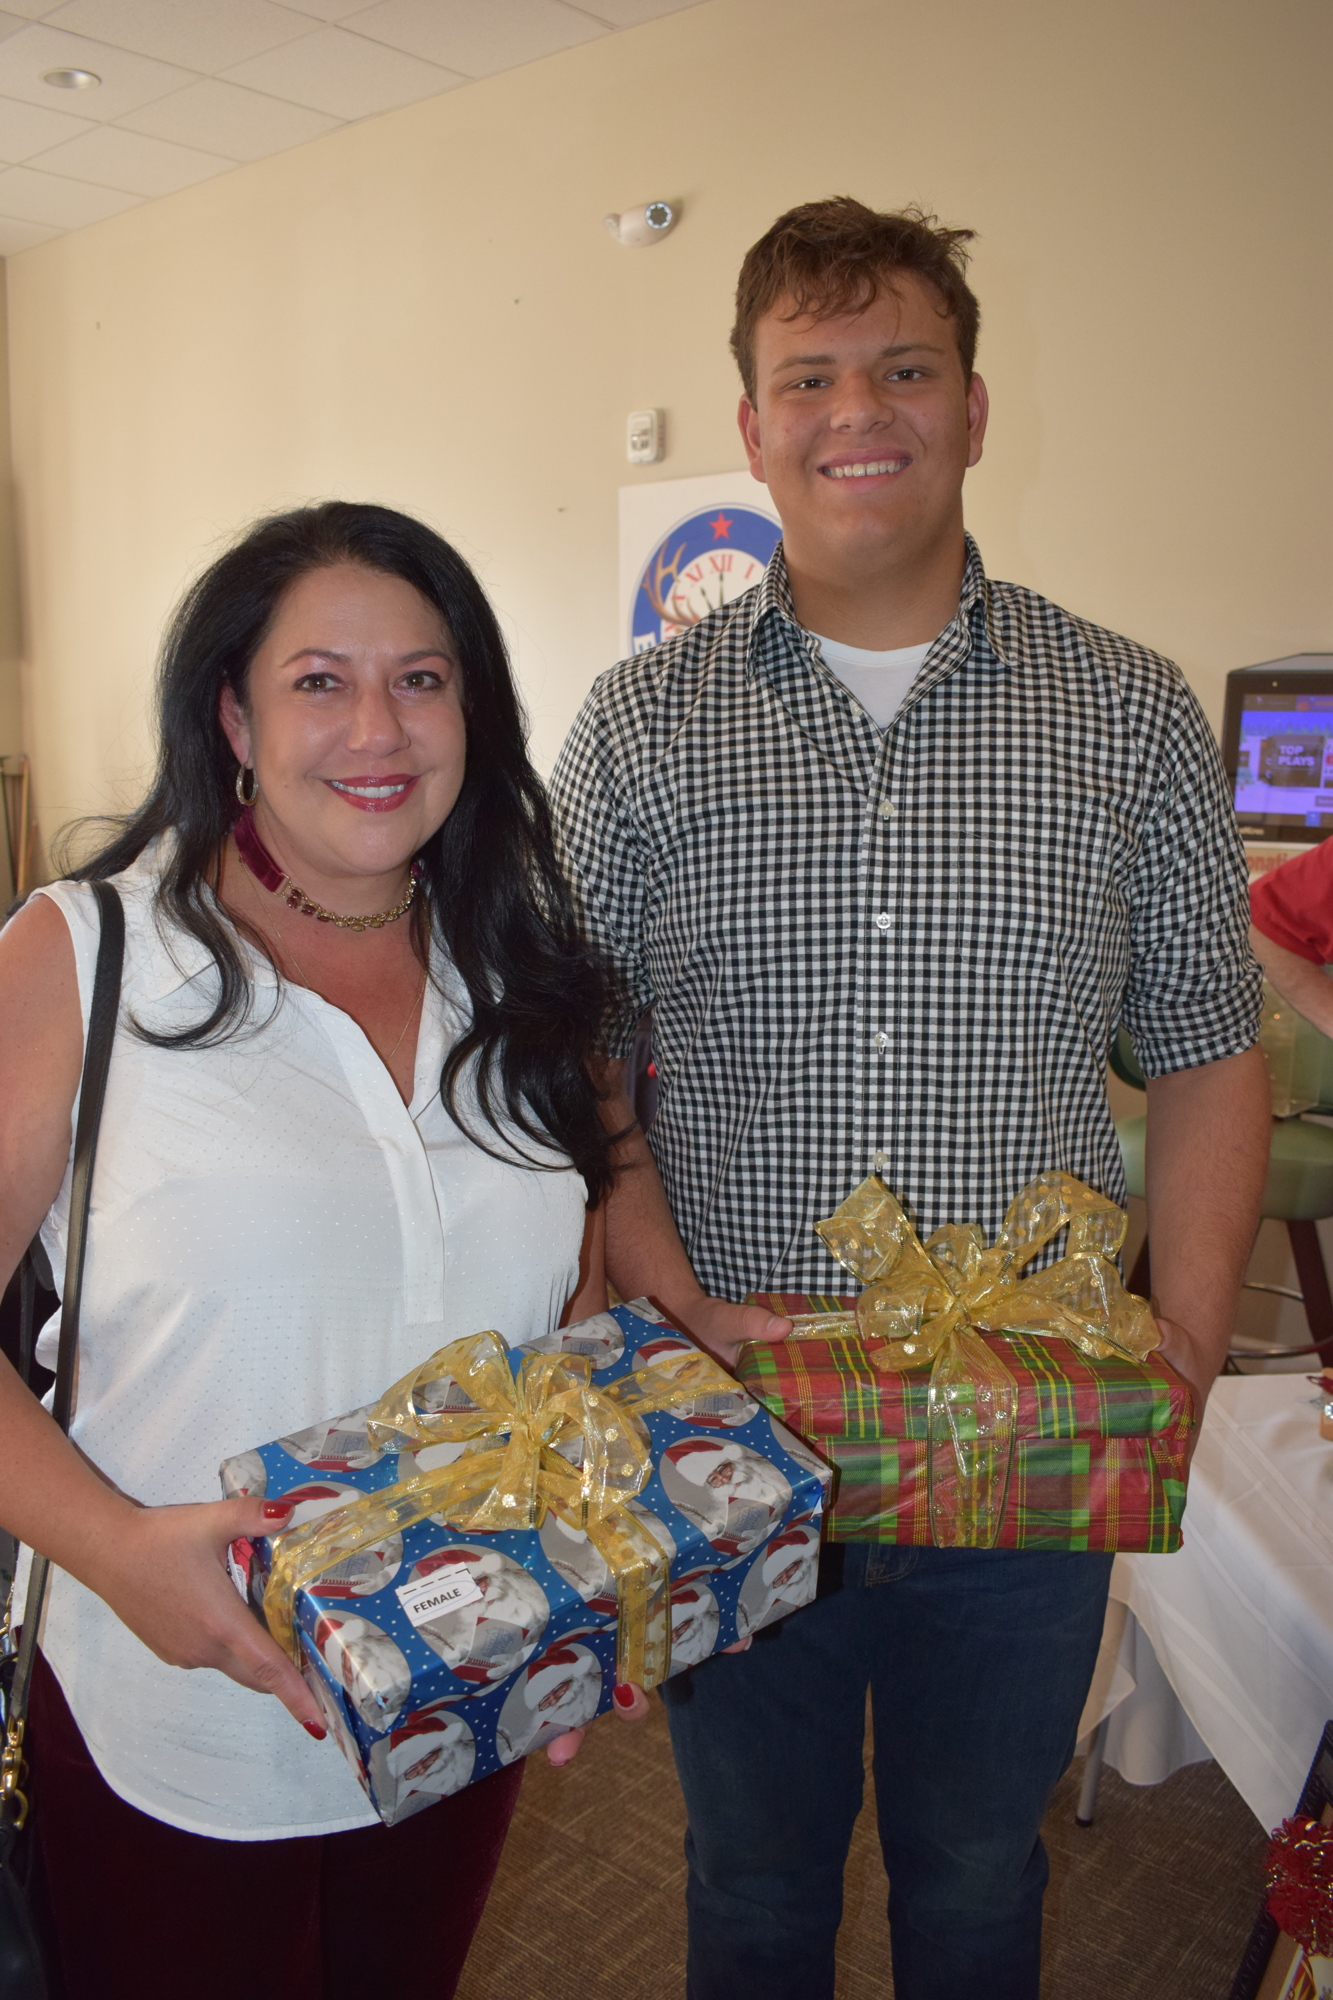 River Pointe's Leah Zammit and her son, Luke Sudul bring gifts to the Shoebox Drive.